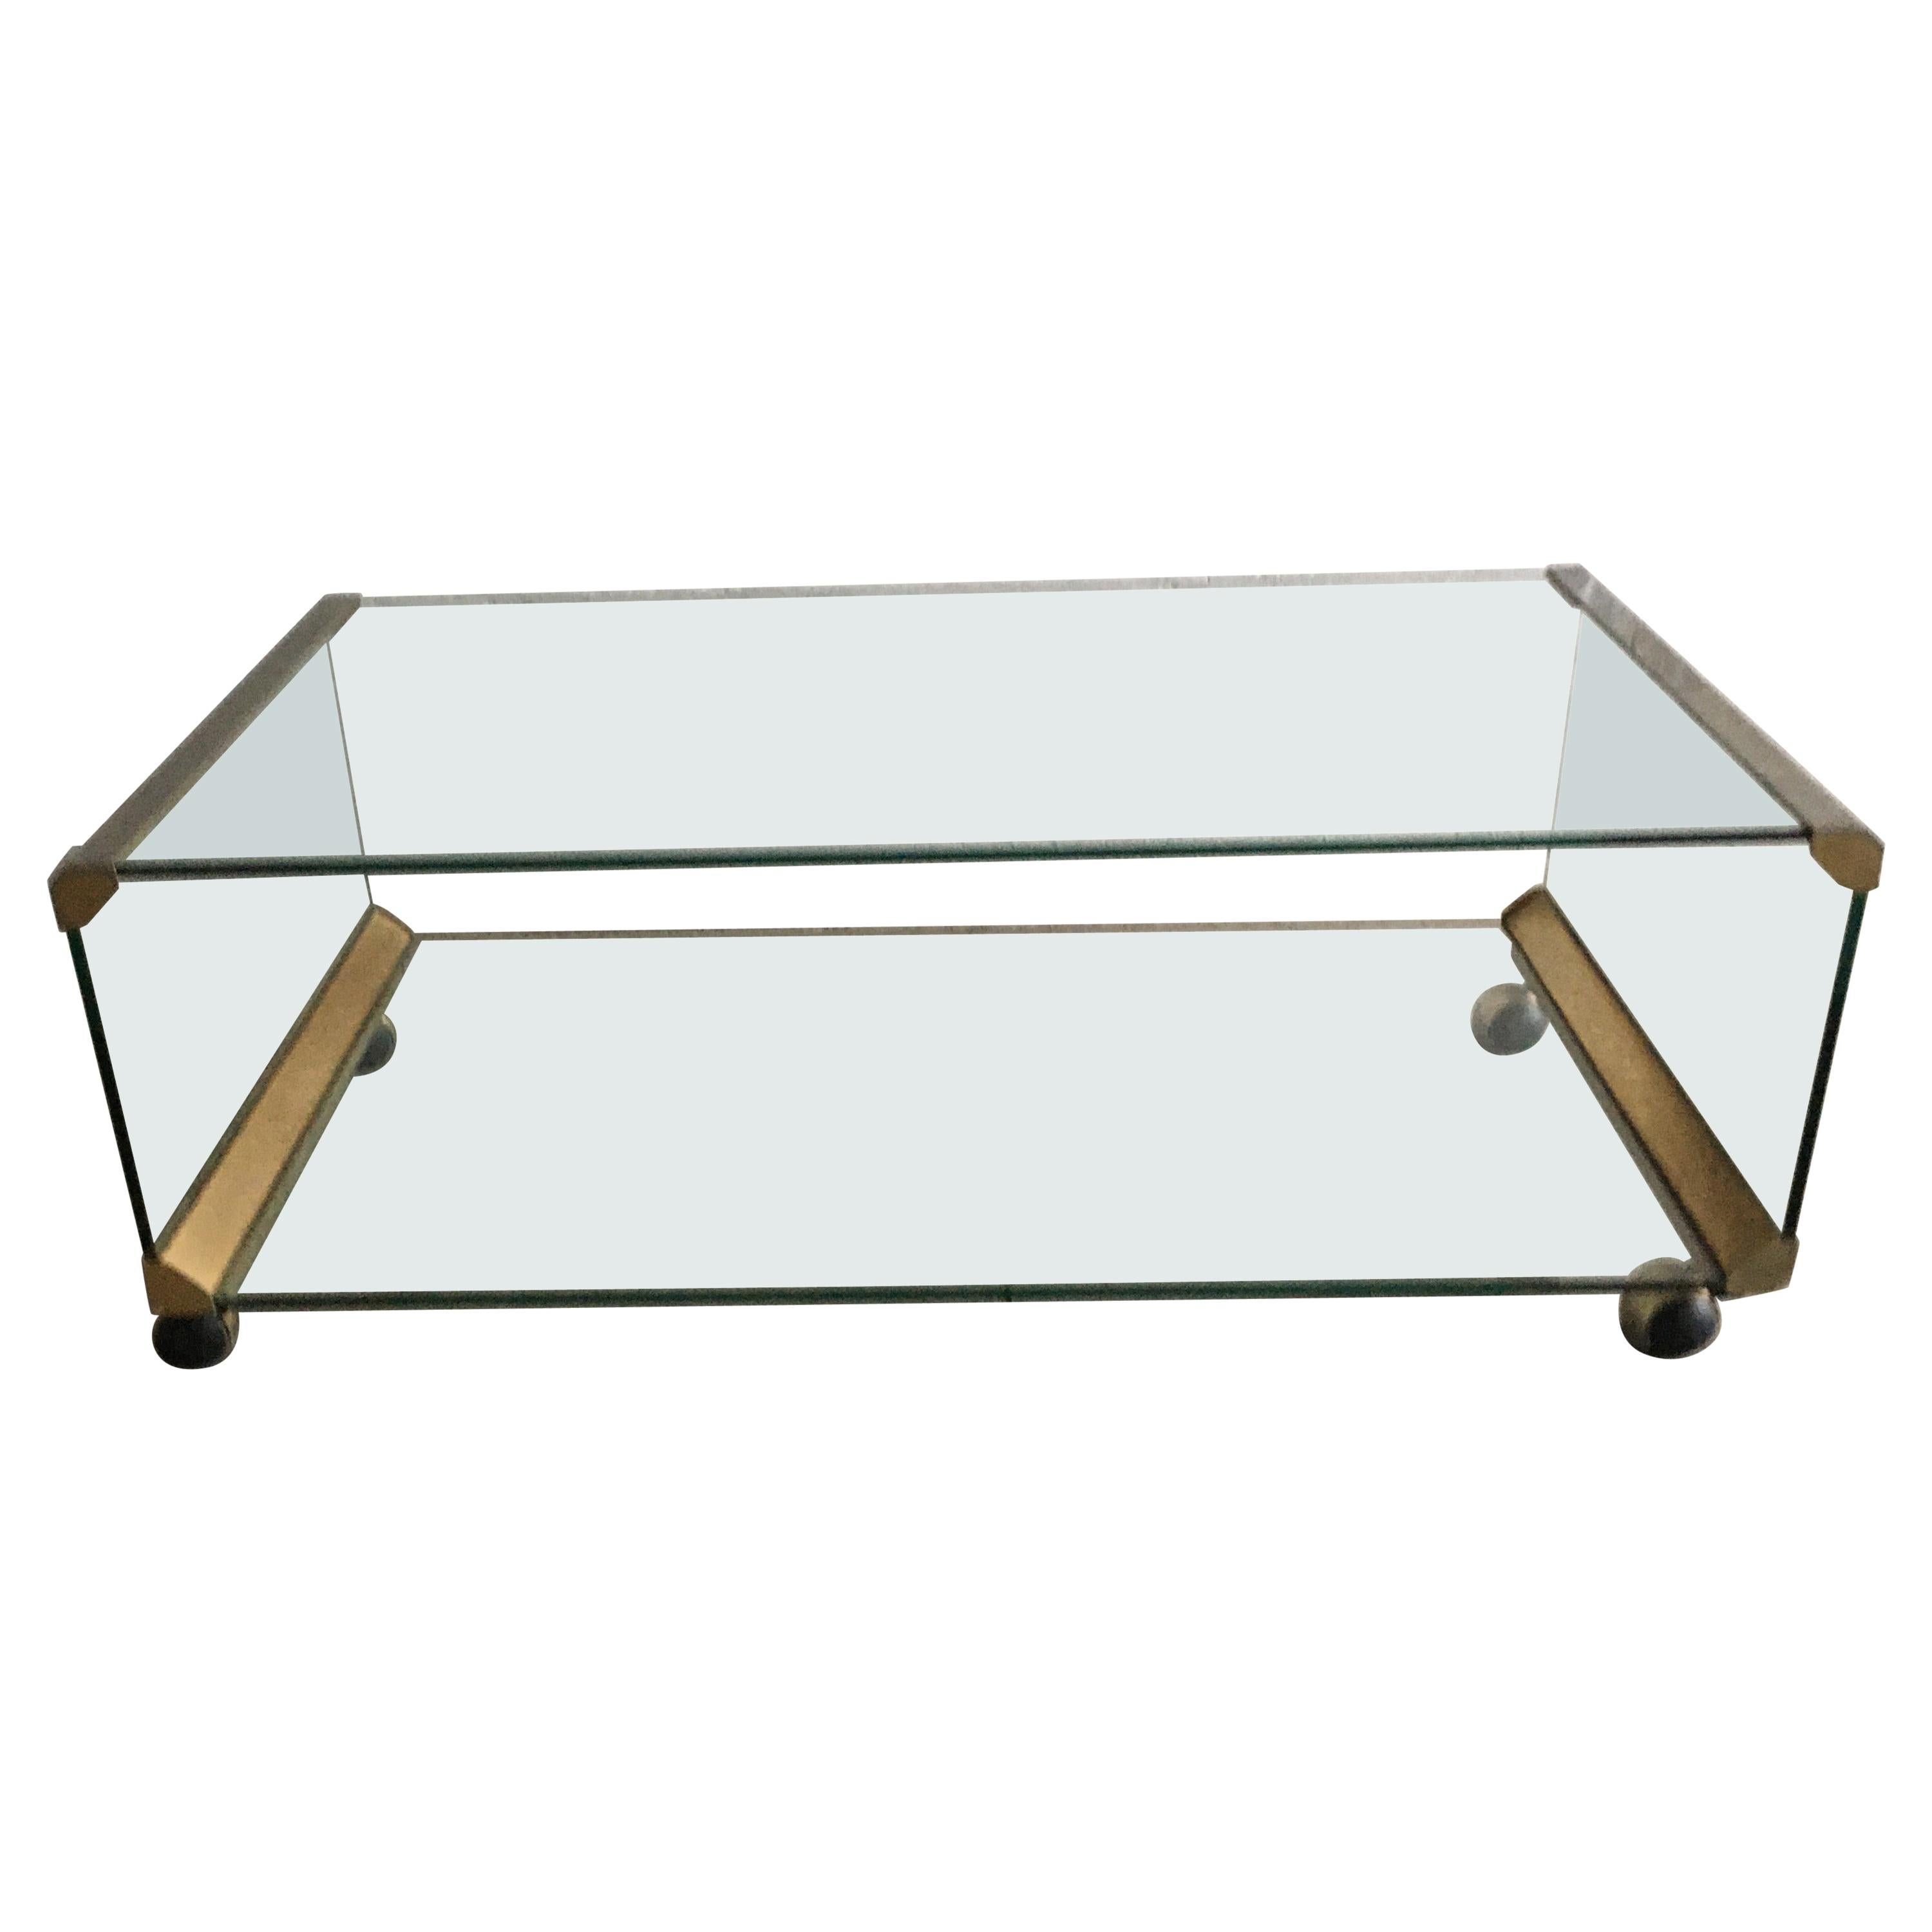 Mid-Century Modern Italian Chrome and Glass Coffee Table by Gallotti & Radice For Sale